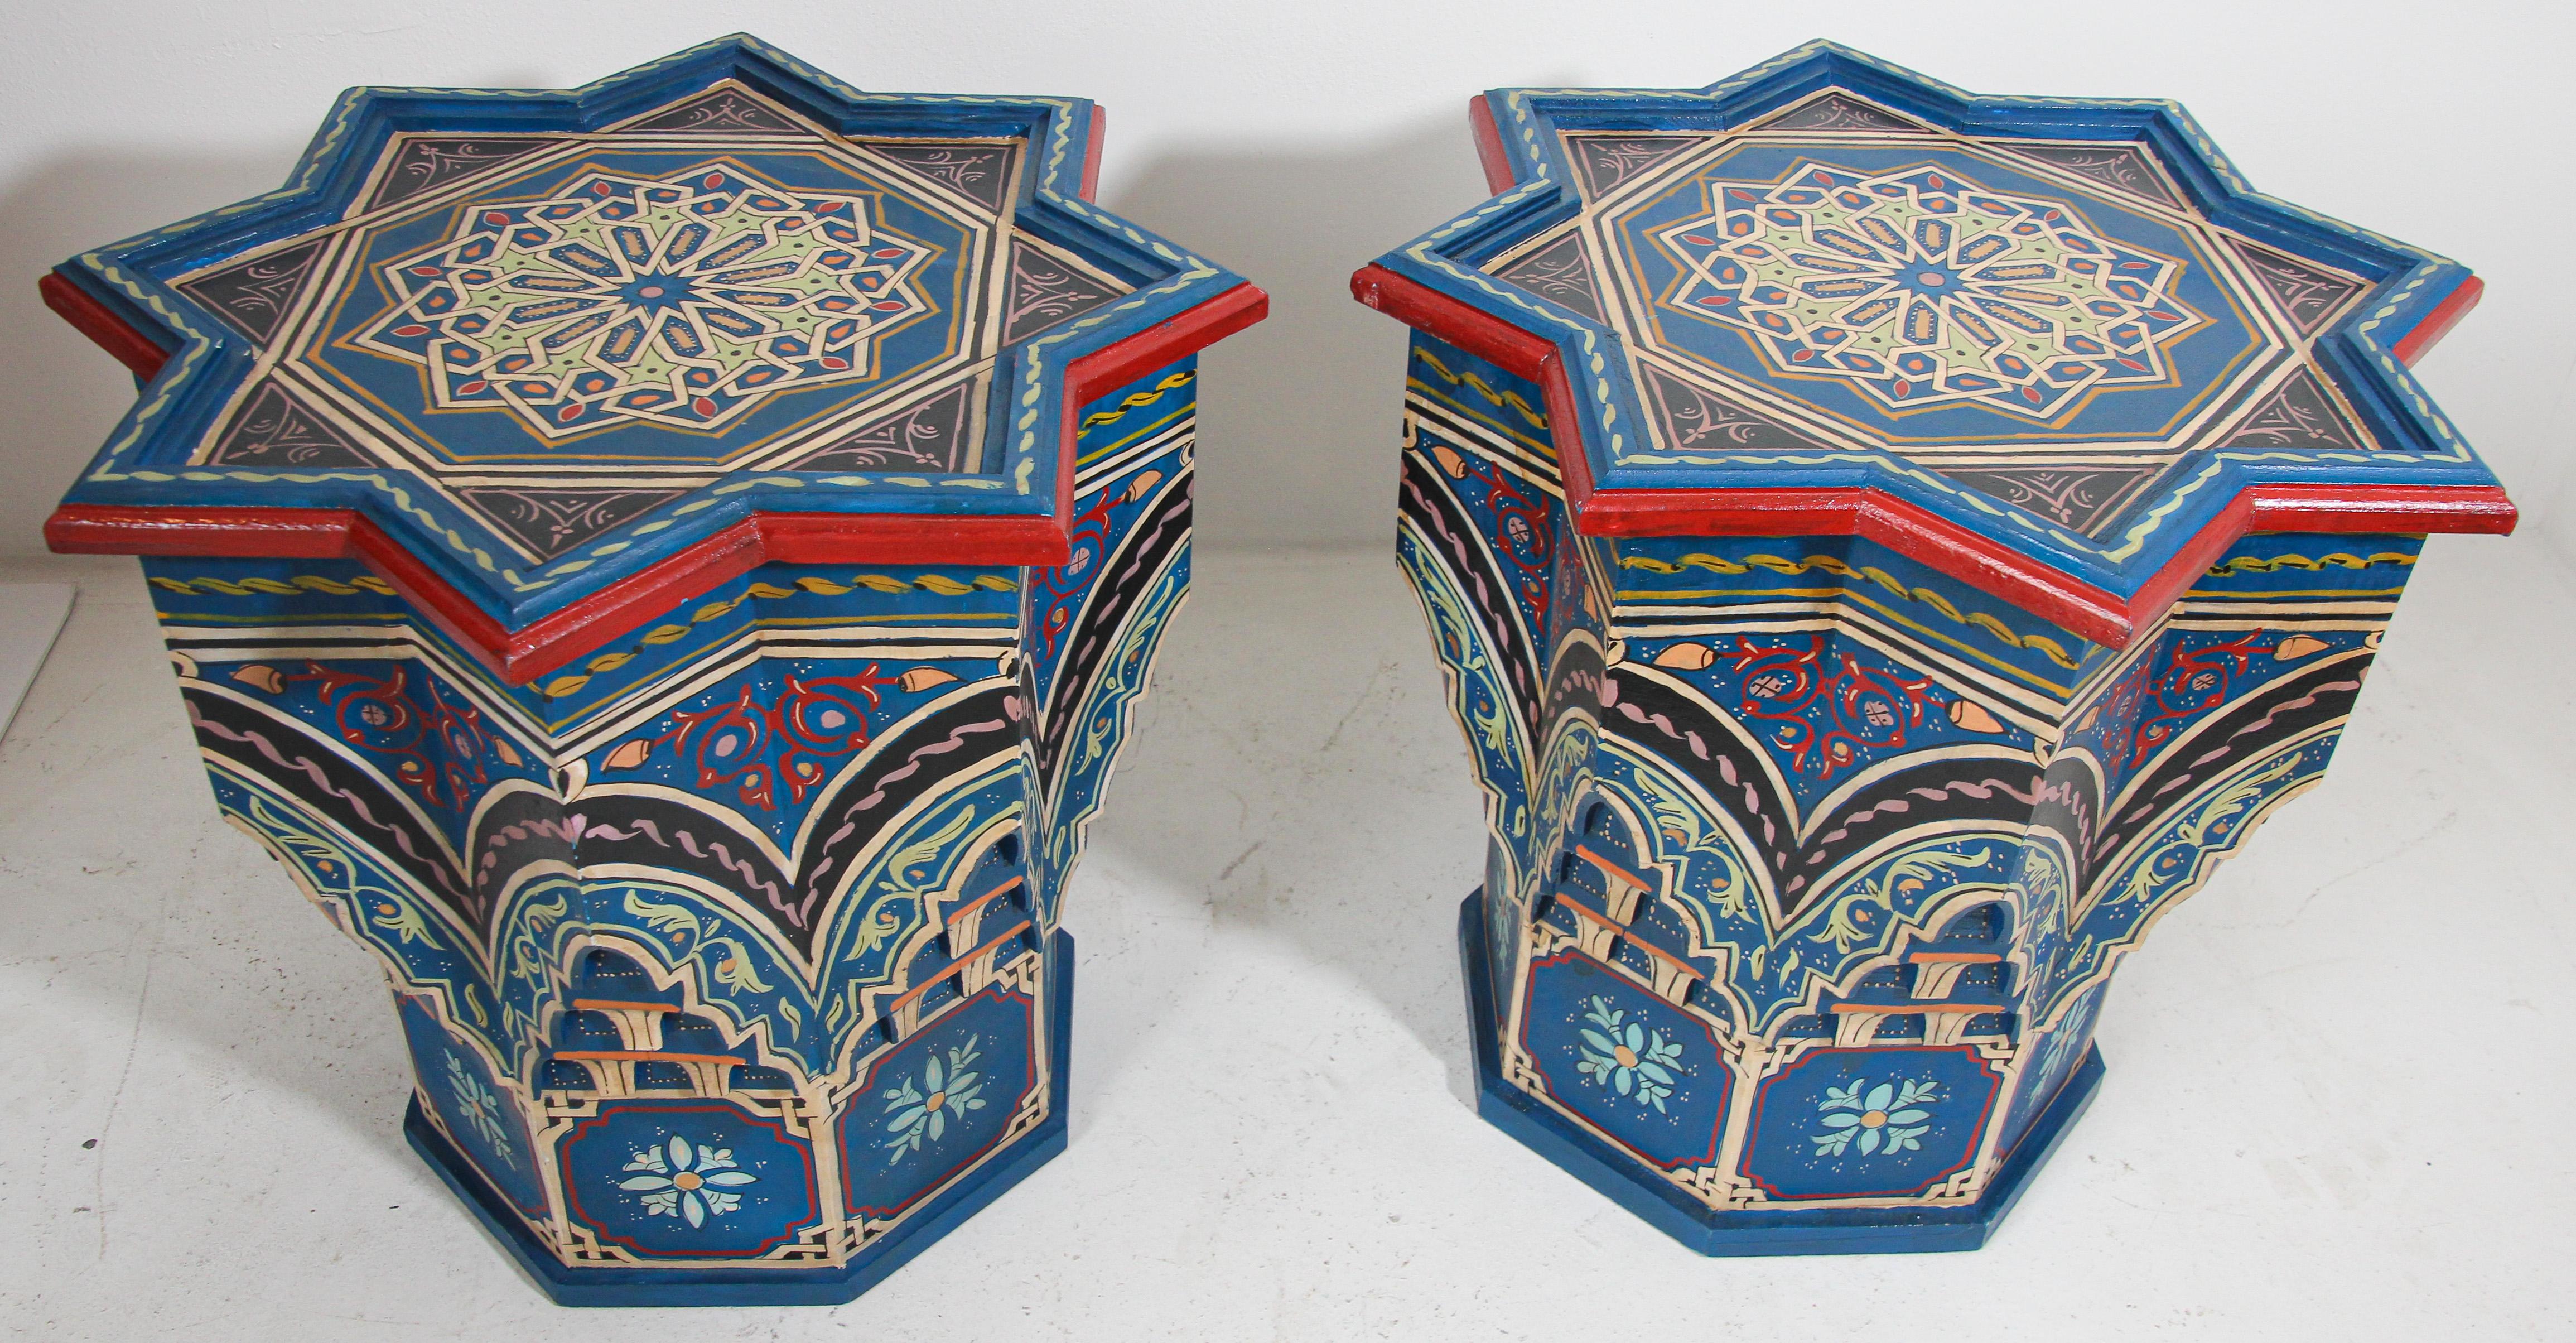 Pair of Moroccan colorful blue hand painted and carved side occasional table with Moorish Islamic designs.
Vintage 1970s Moroccan hand-painted blue wooden end tables with floral and geometric designs in traditional Mediterranean colors, carved with